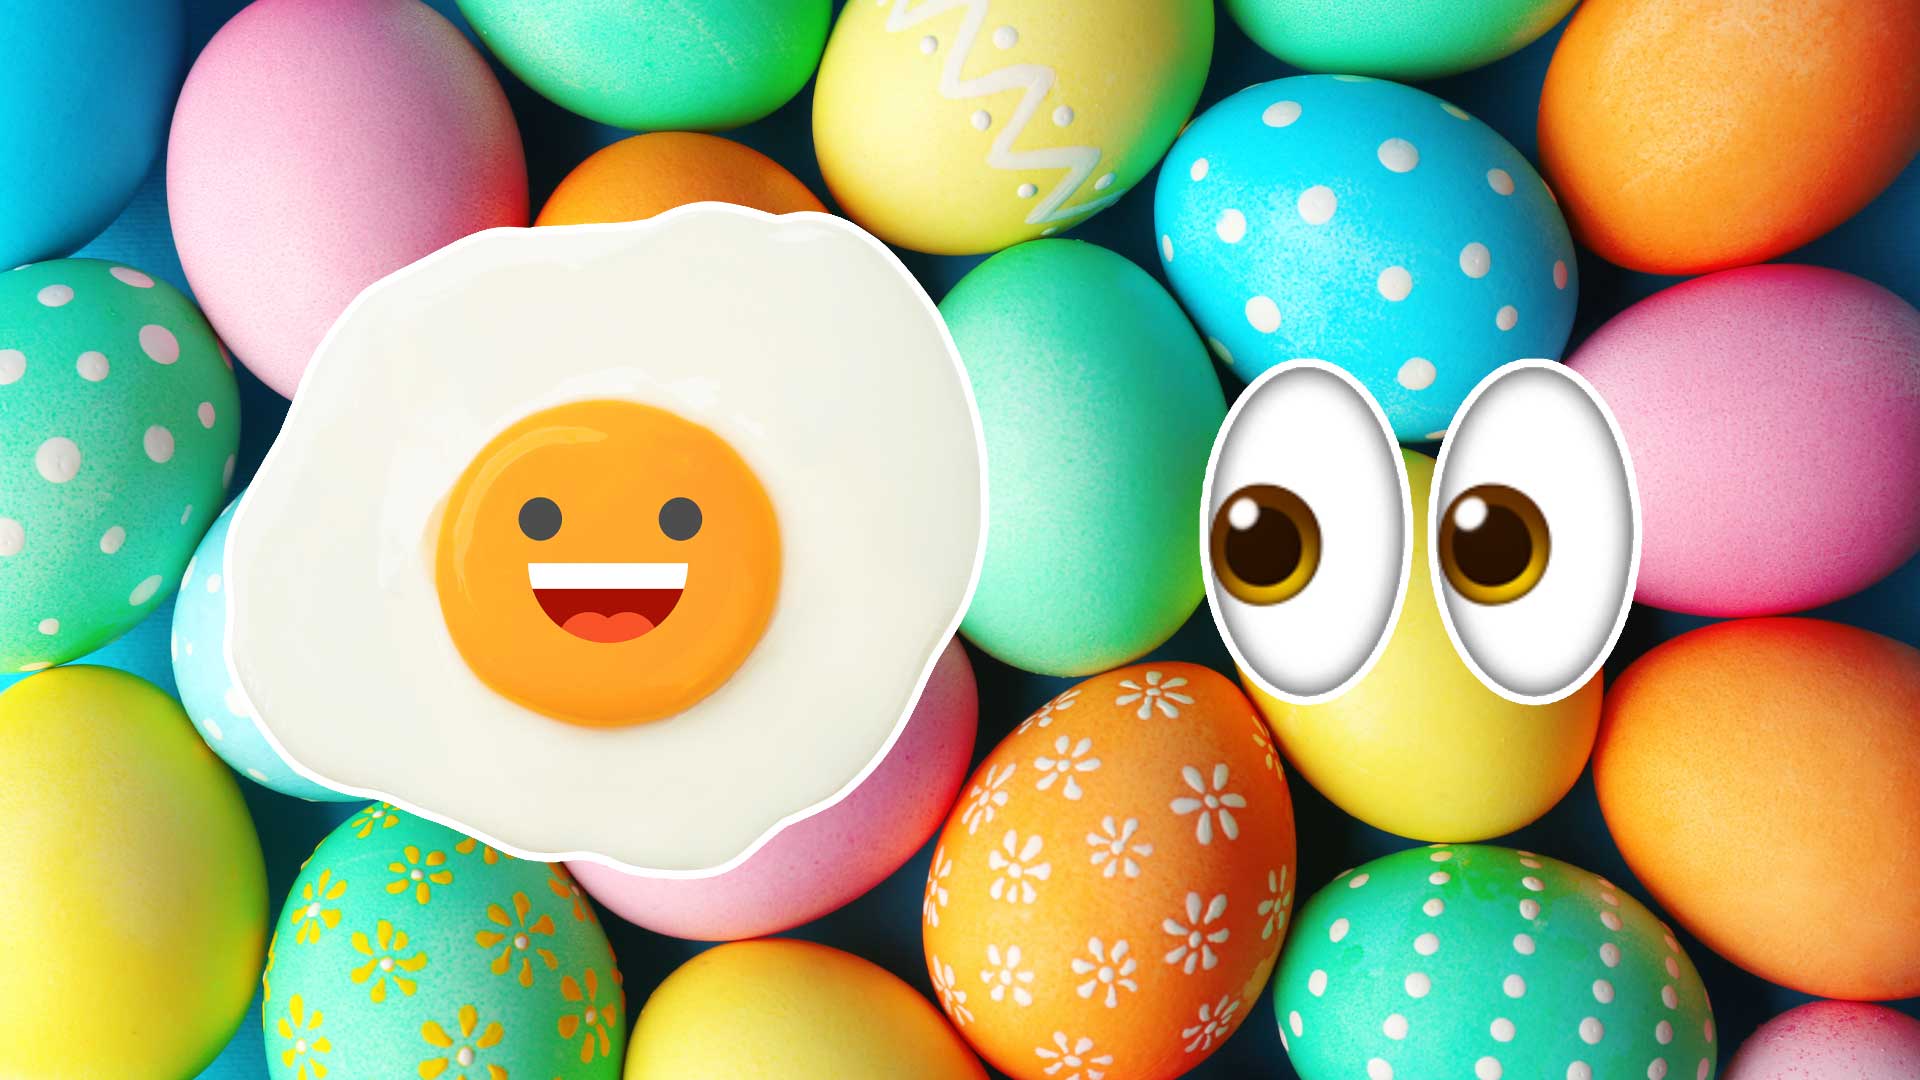 Easter emoji clue featuring a fried egg and a pair of eyes